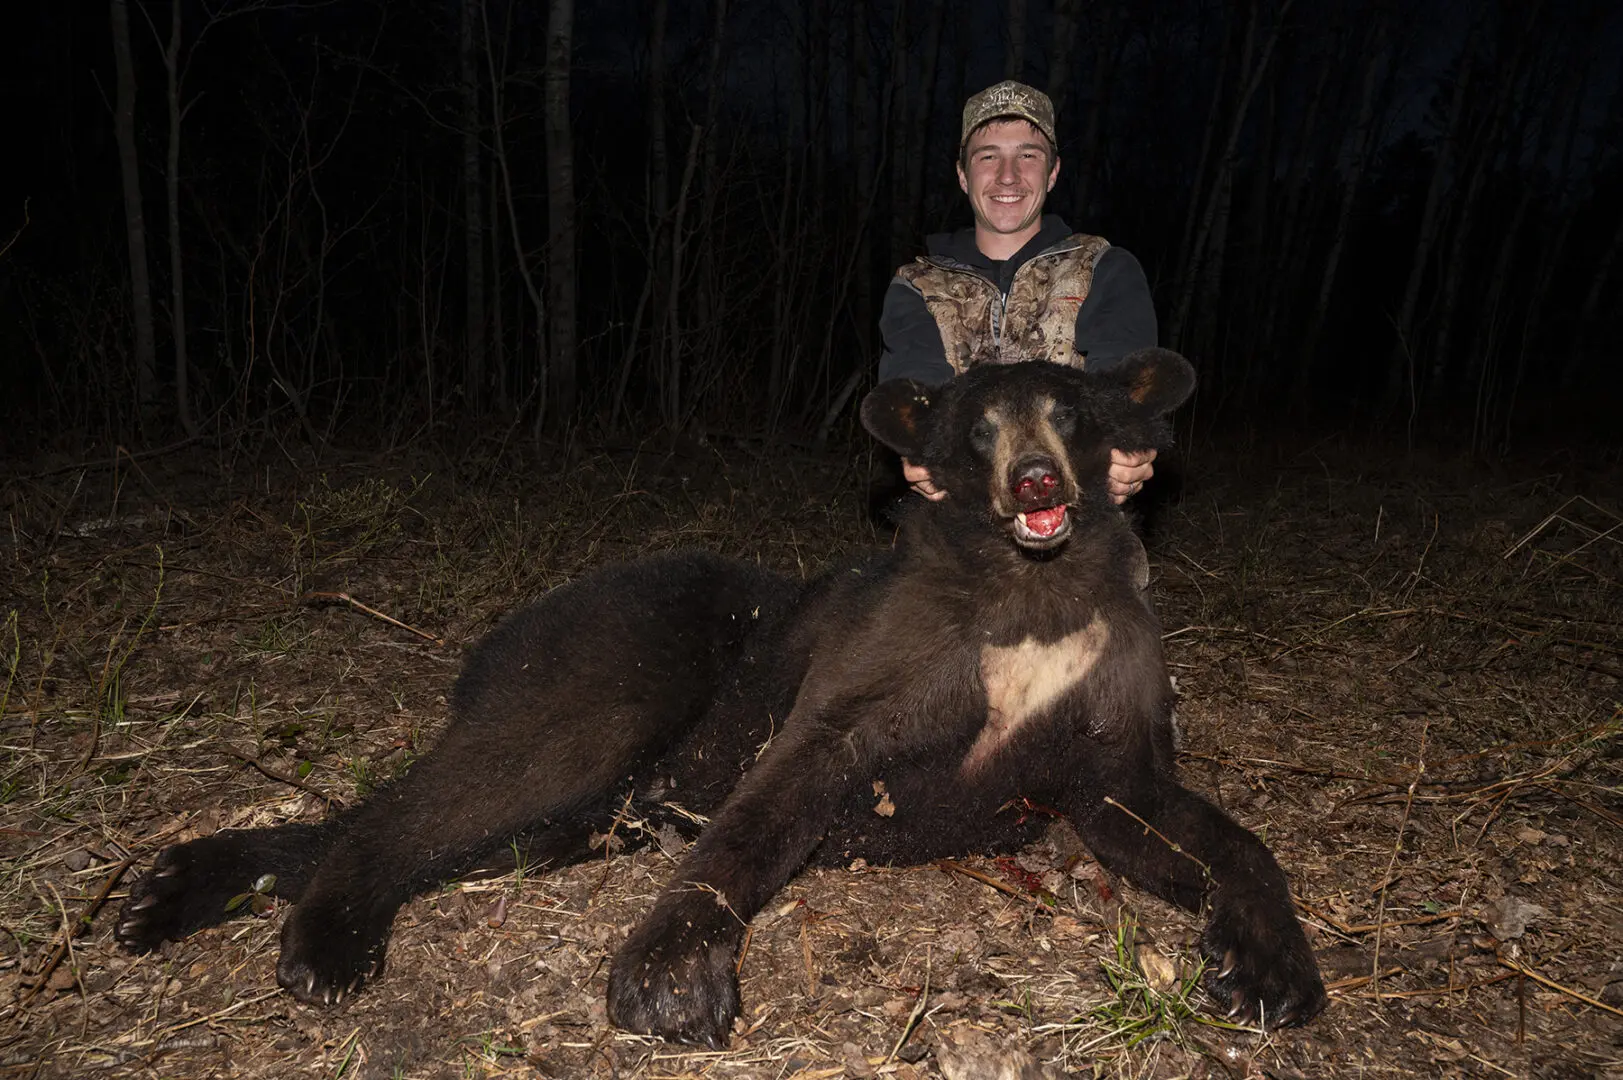 A man sitting on the ground with a large black bear.